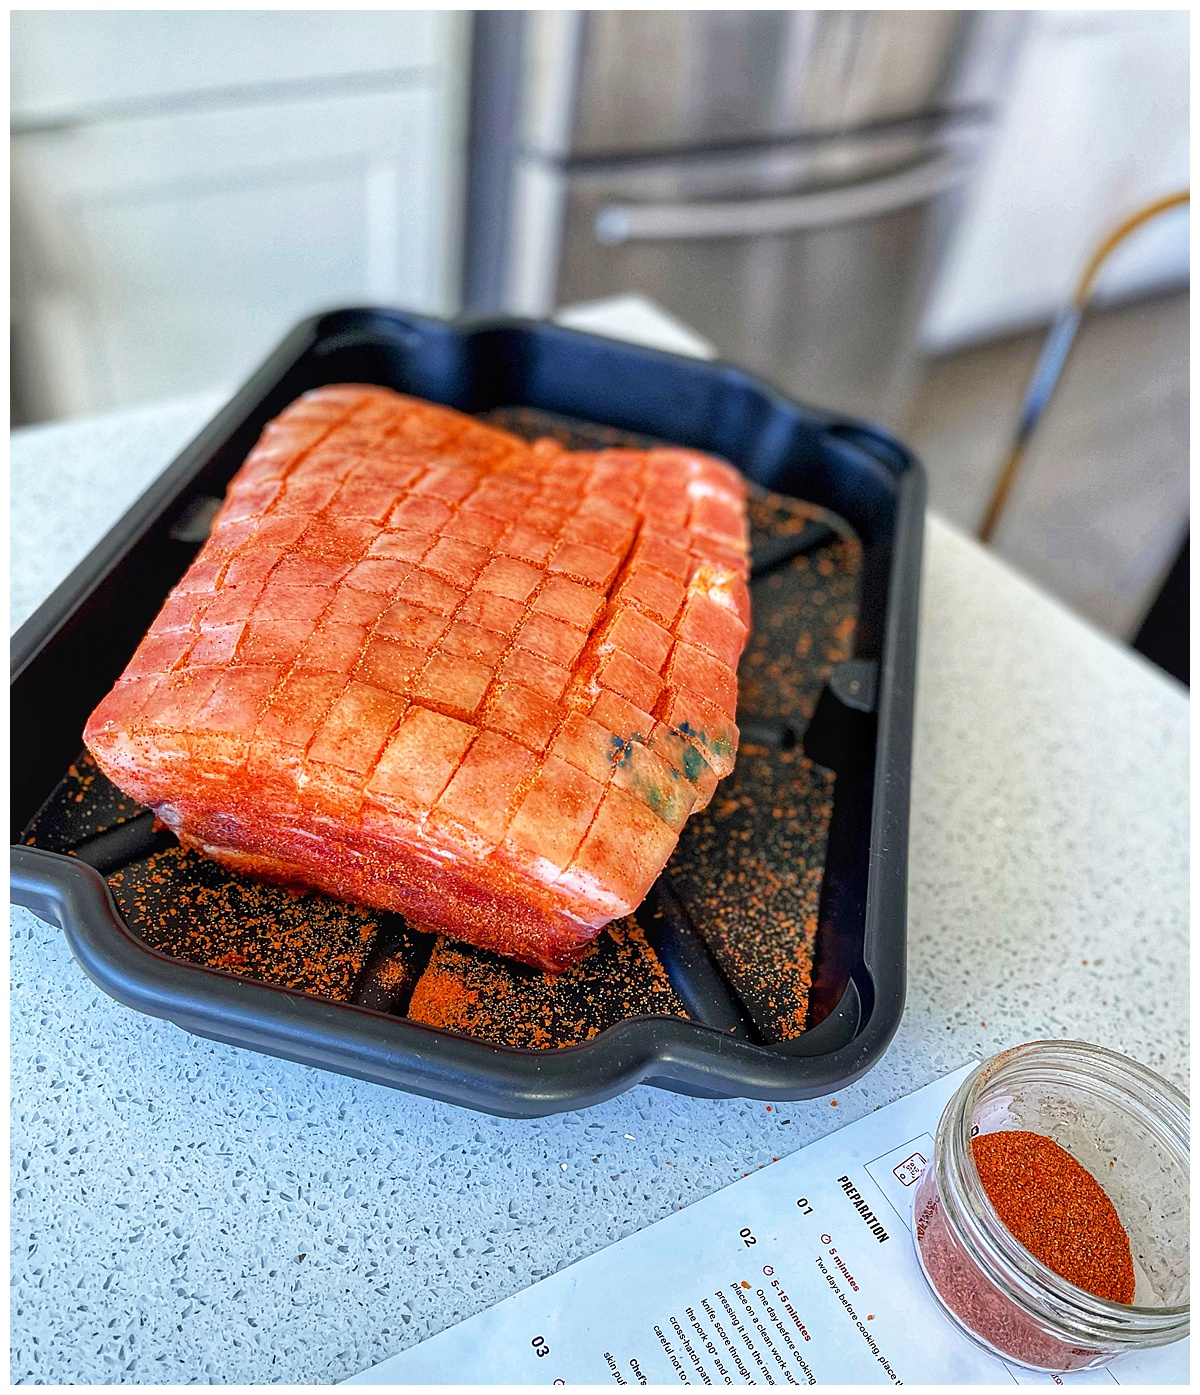 Traeger Pulled Pork meal kit with rub